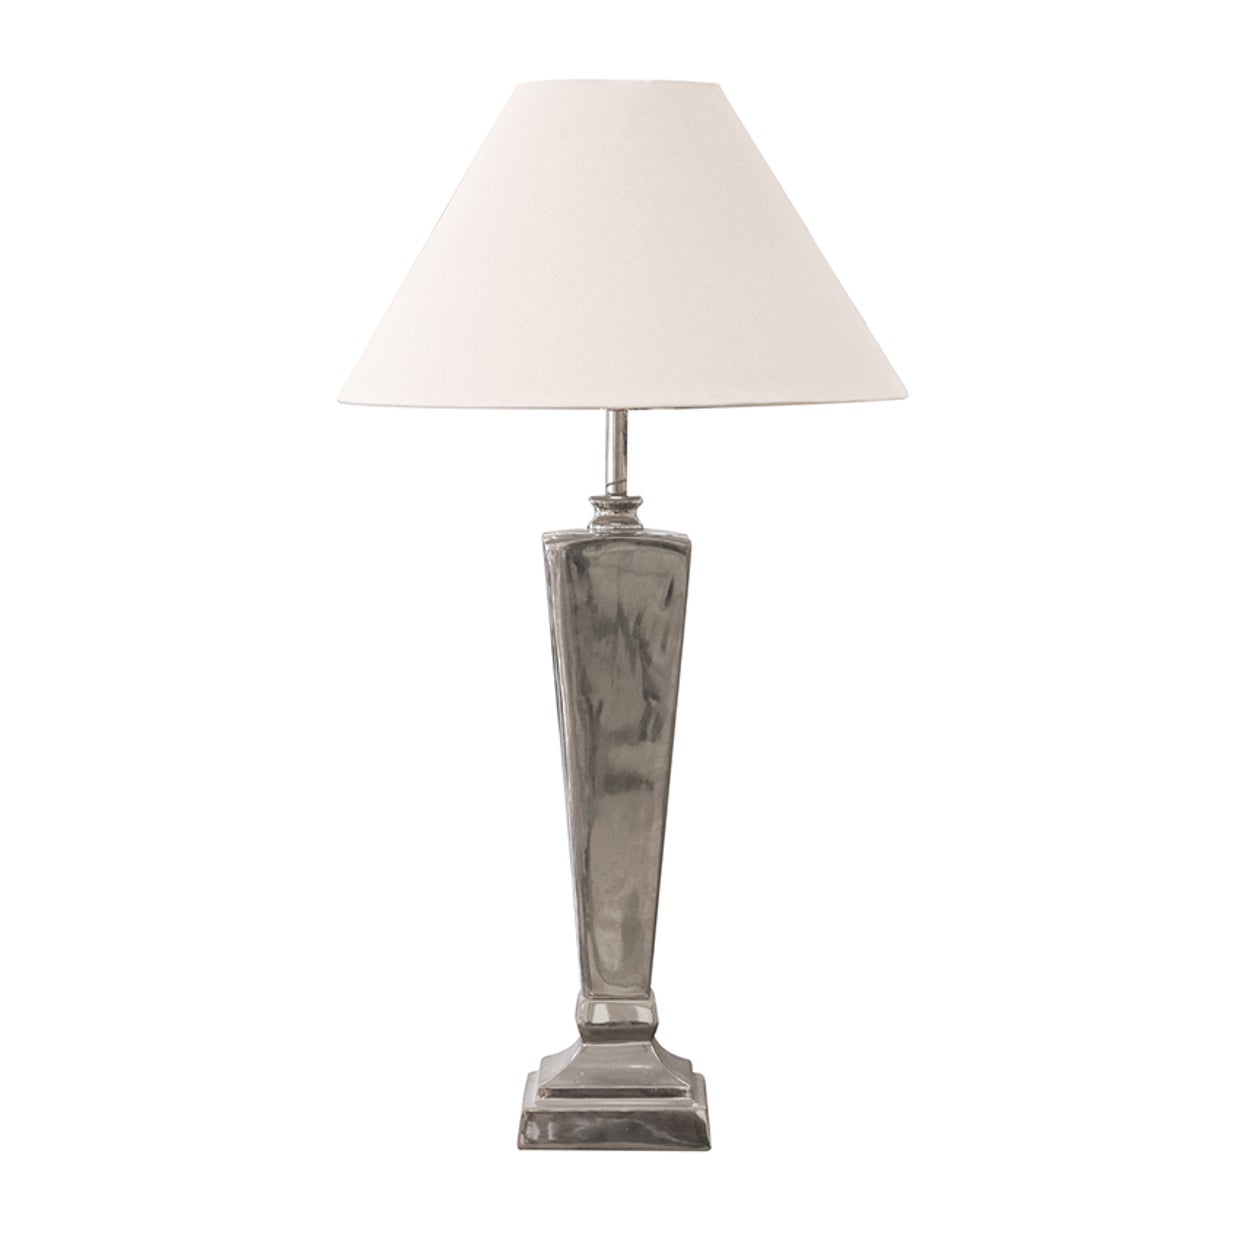 London Square Tapered Lamp Base in Nickel Finish